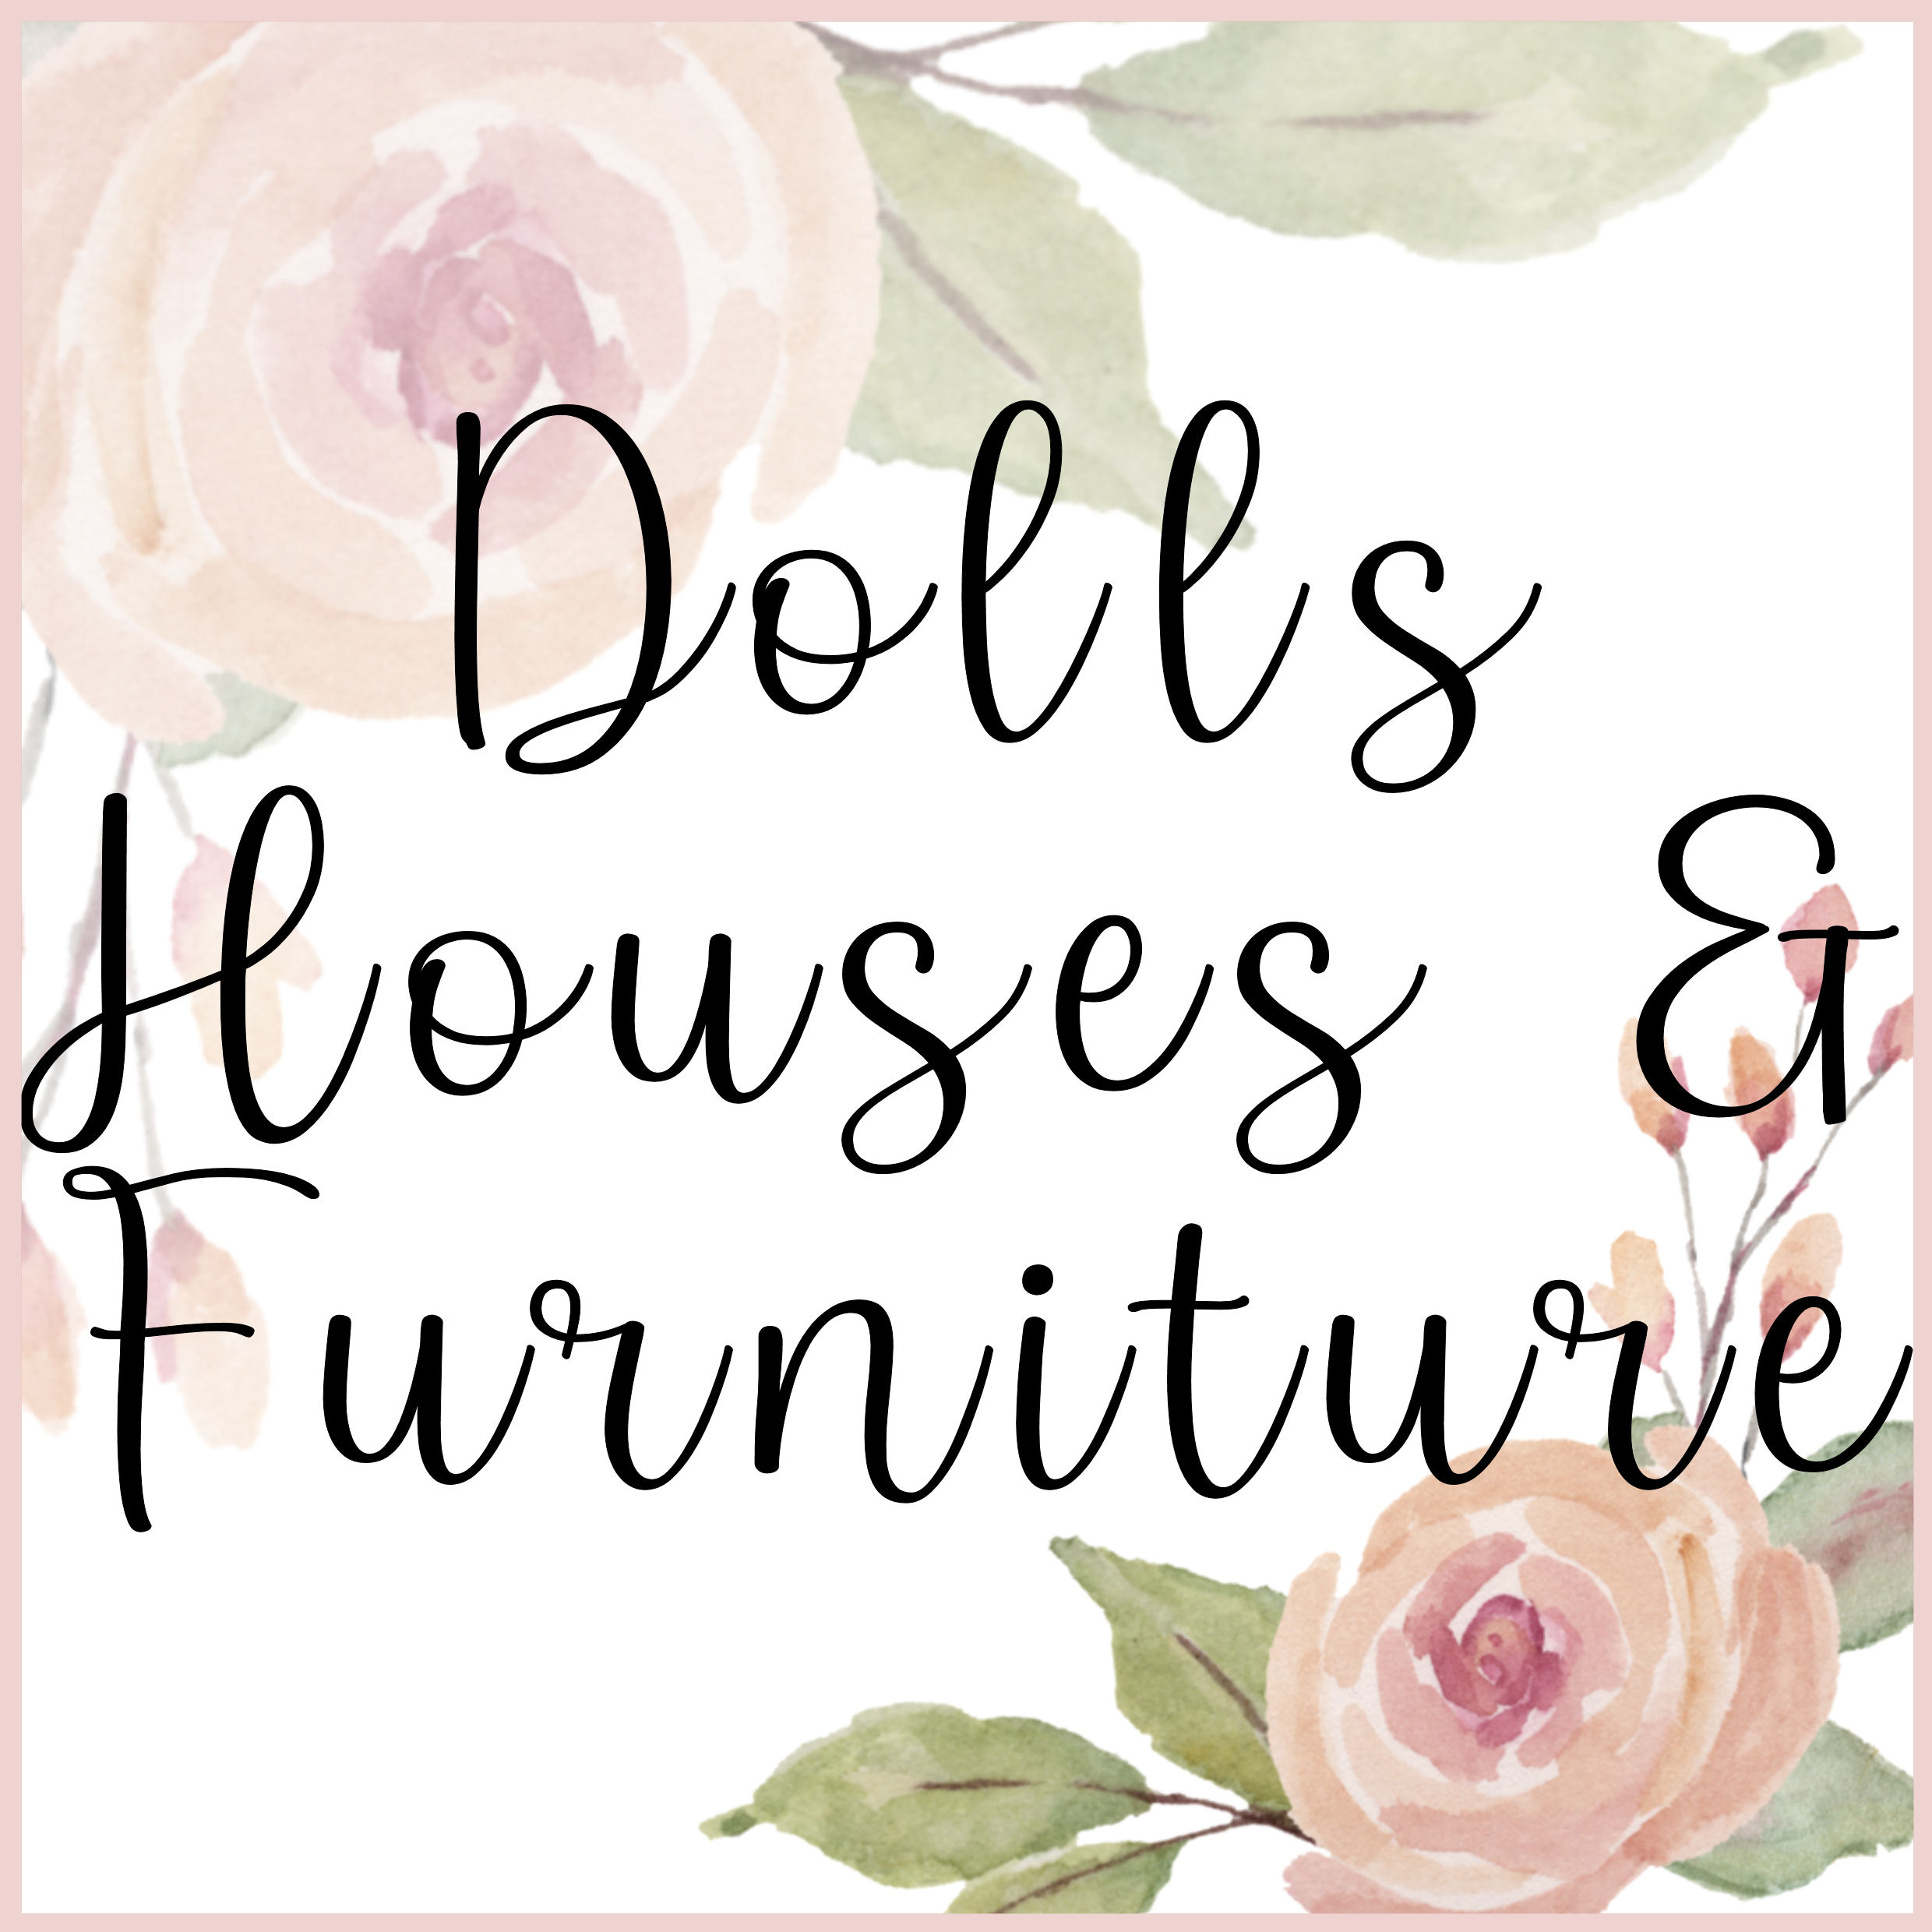 Dolls Houses and Furniture